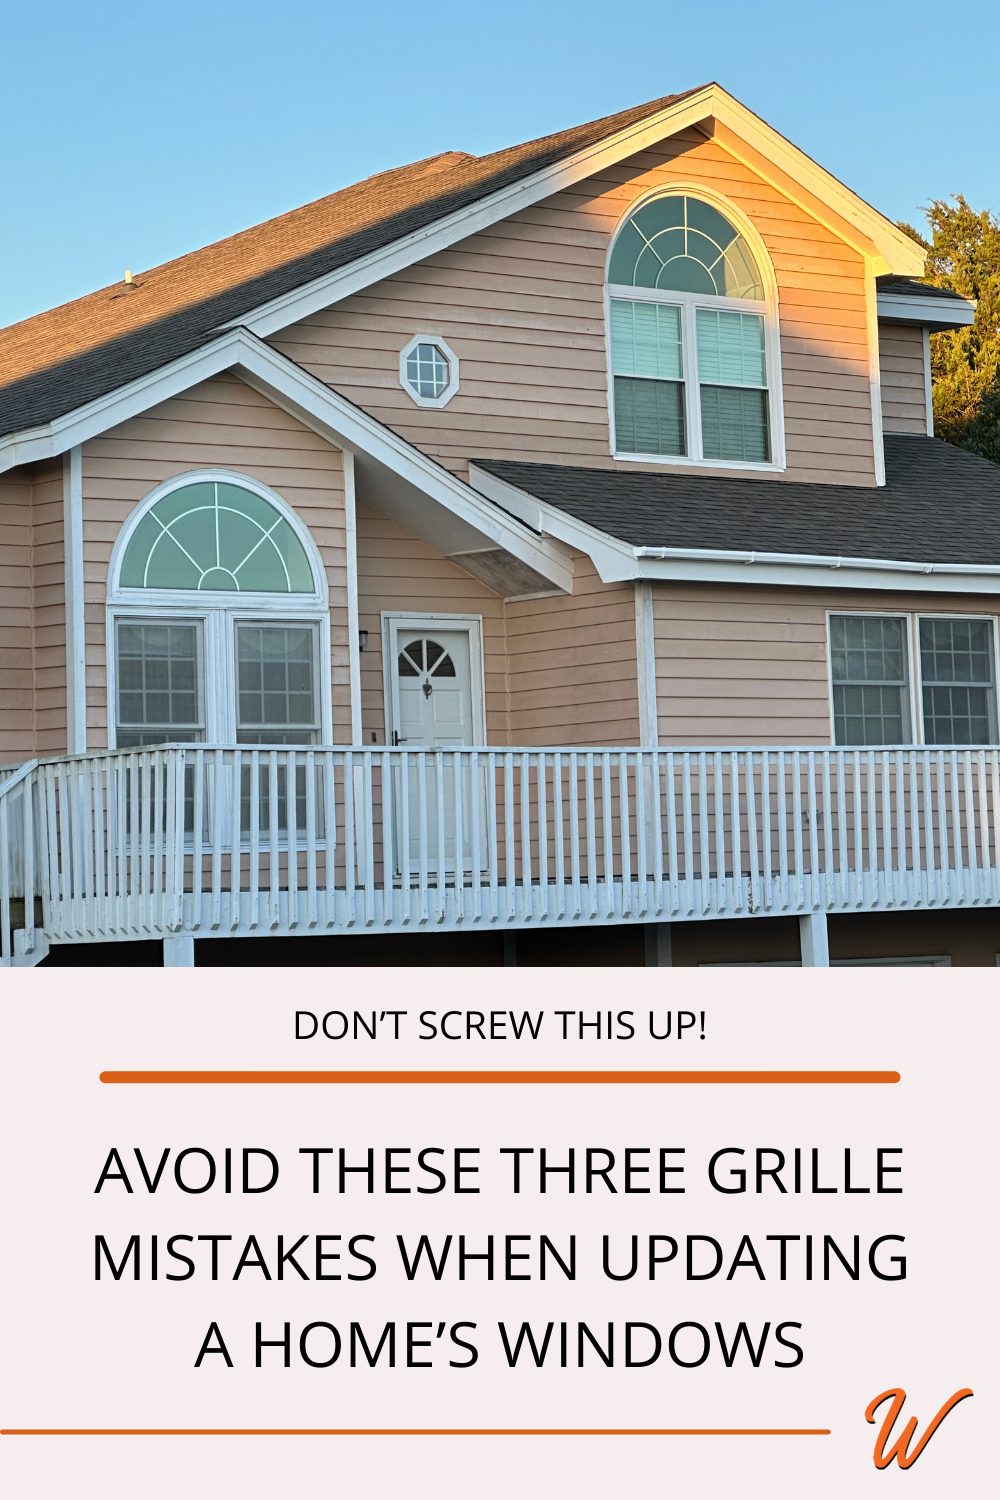 Image of a home with mismatched grille patterns captioned with "Don't Screw This Up! Avoid these three grille mistakes when updating a home's windows"